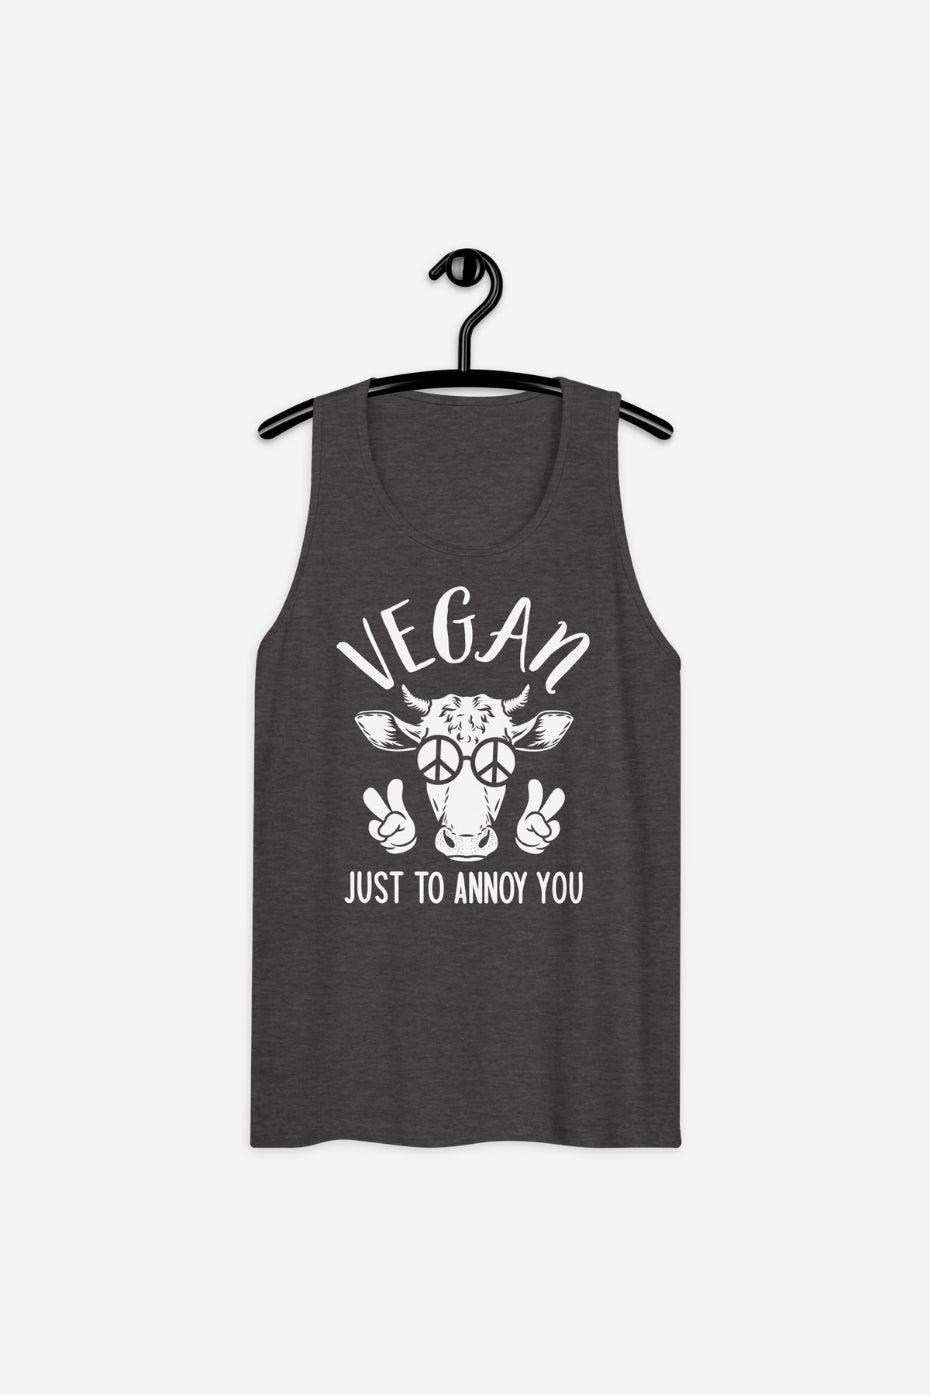 Just To Annoy You Men’s premium tank top